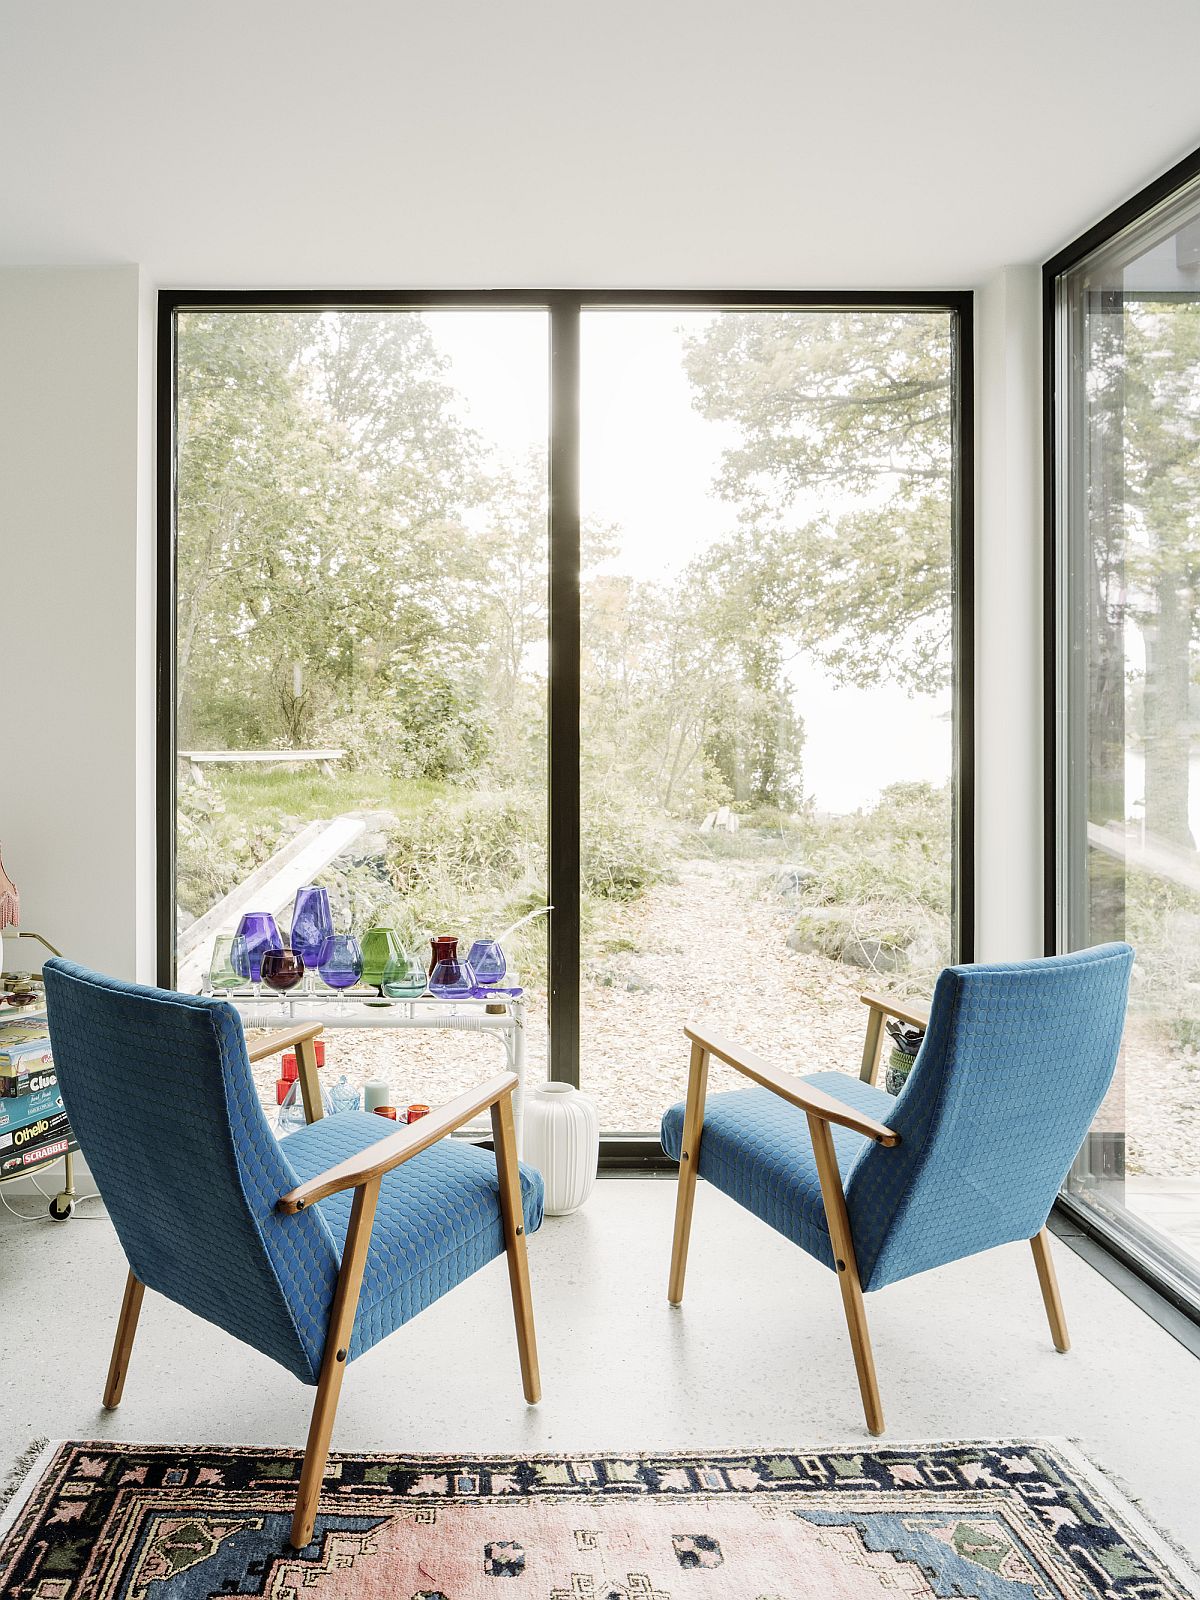 Lovely little conversation nook with large glass walls and bright blue chairs